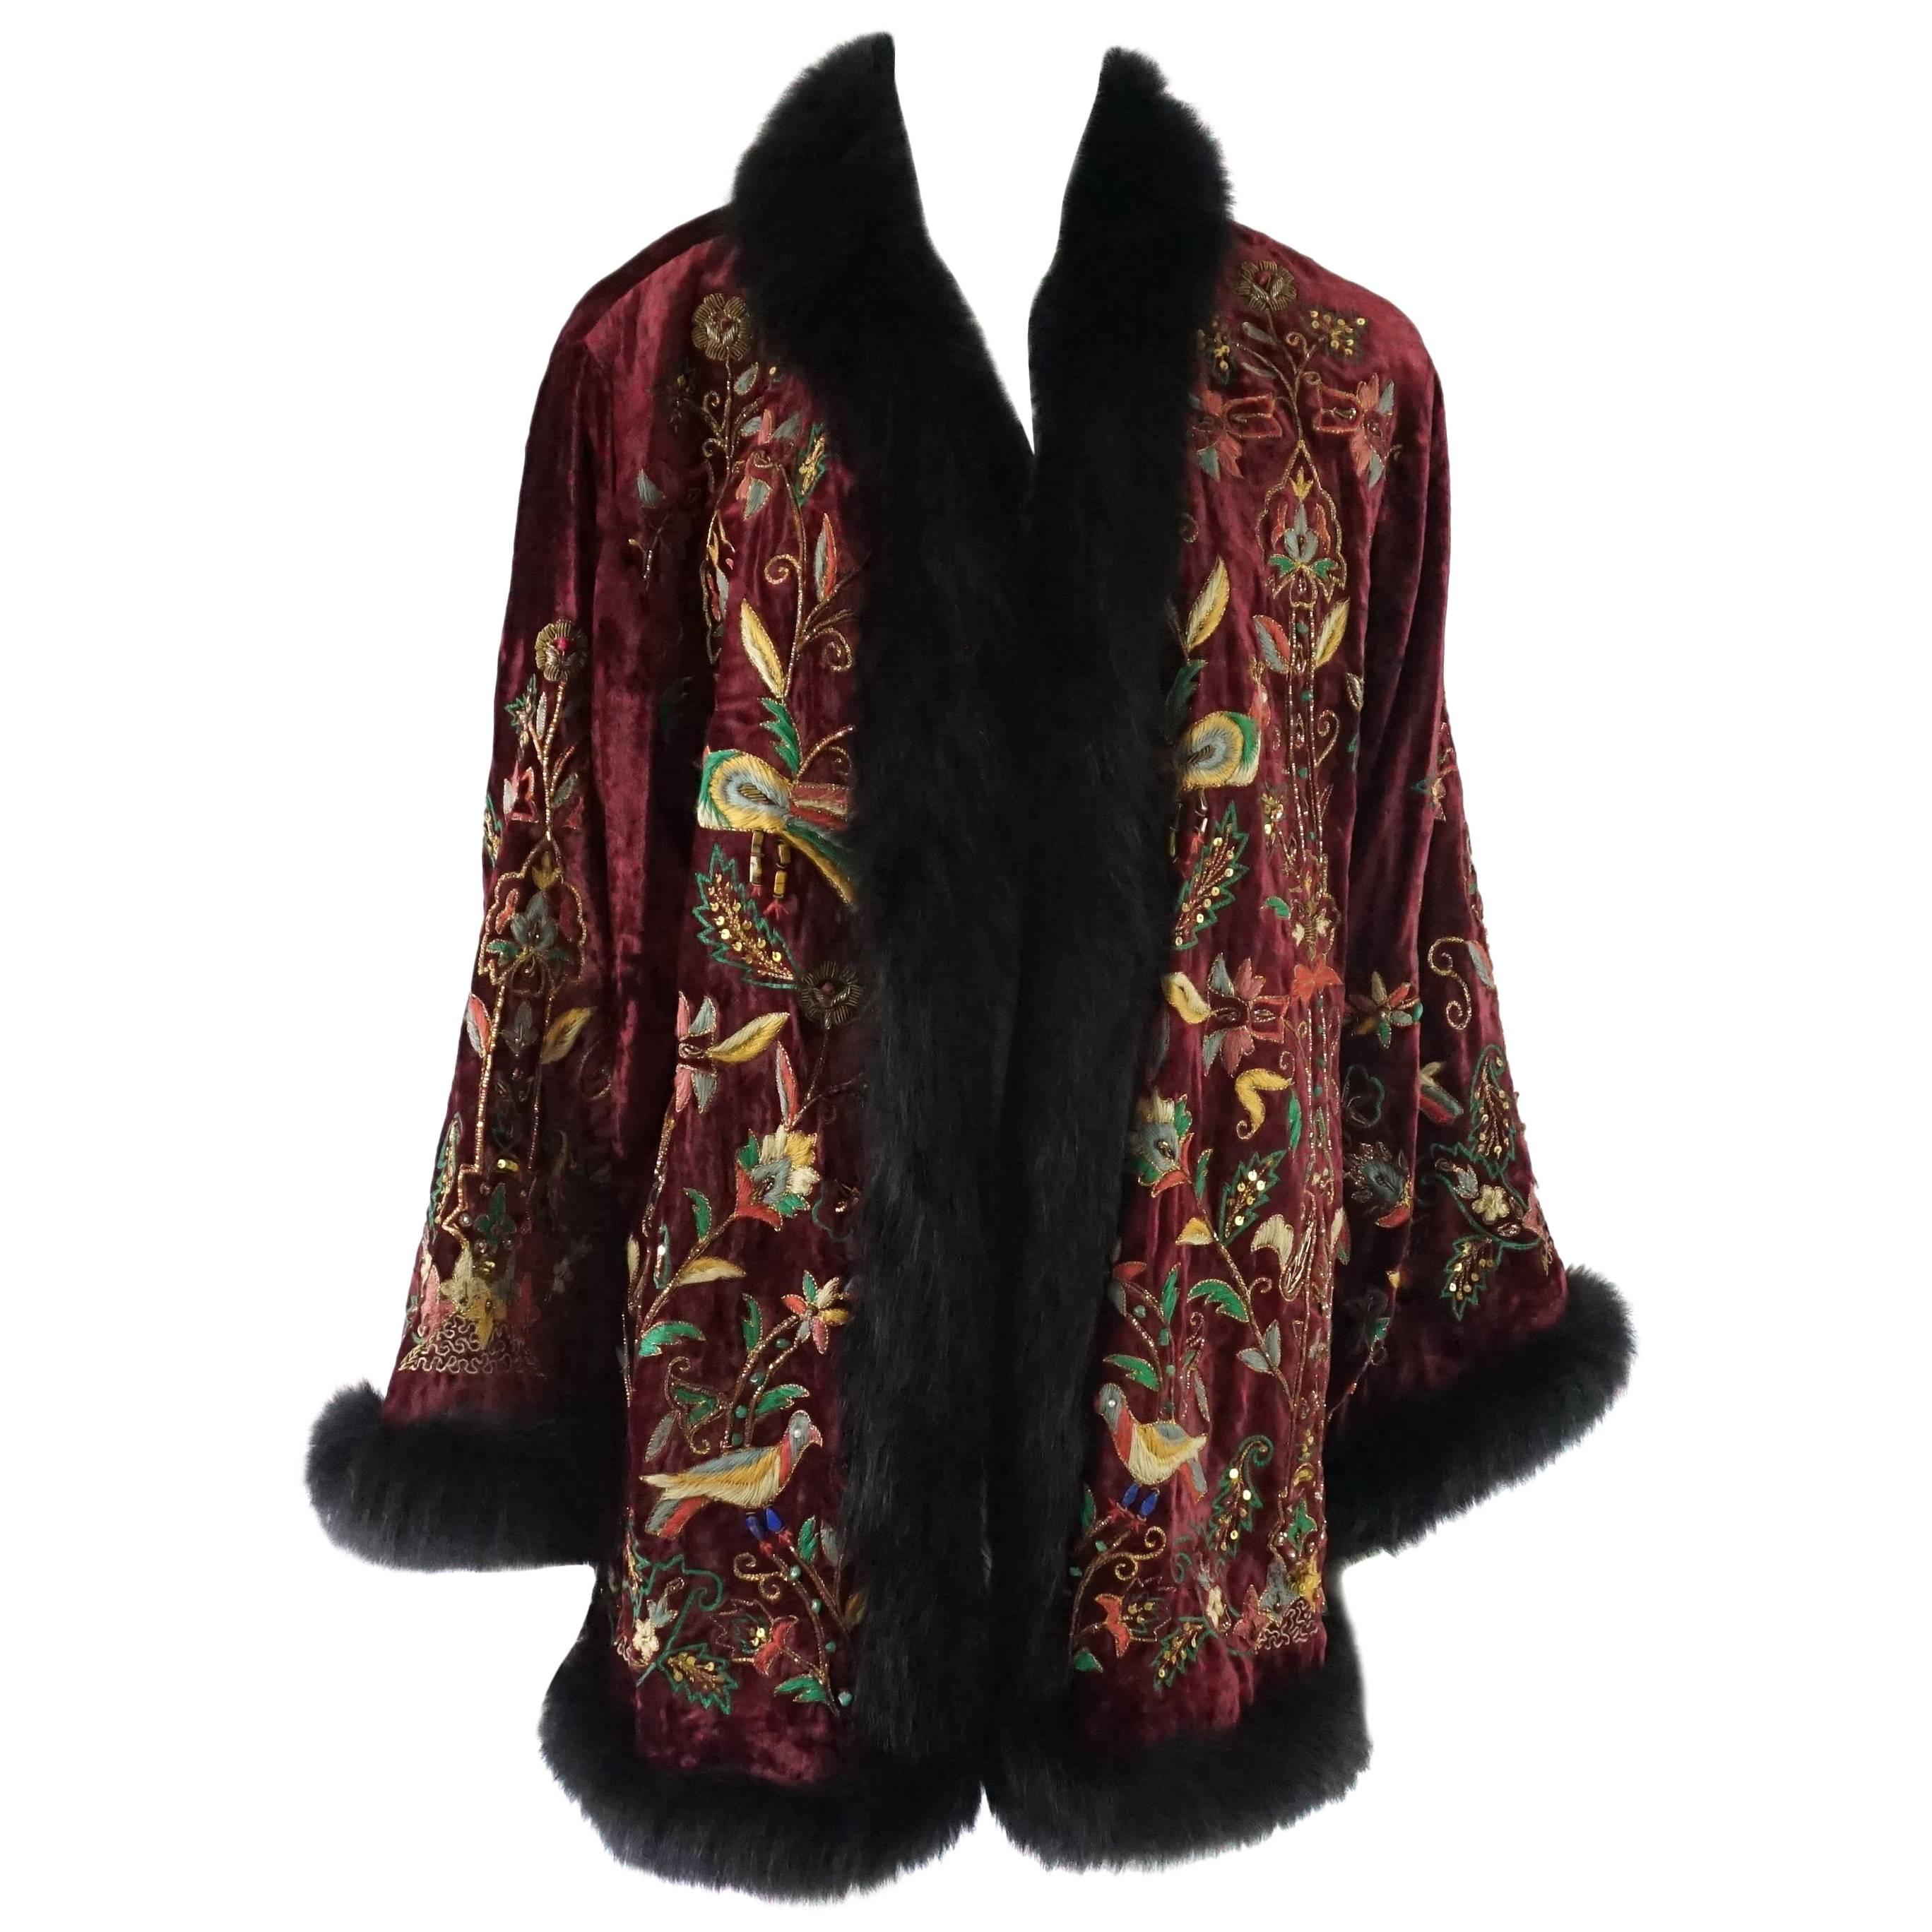 Adrienne Landau Red Velvet and Multi Embroidered Cape with Fox Trim - 10